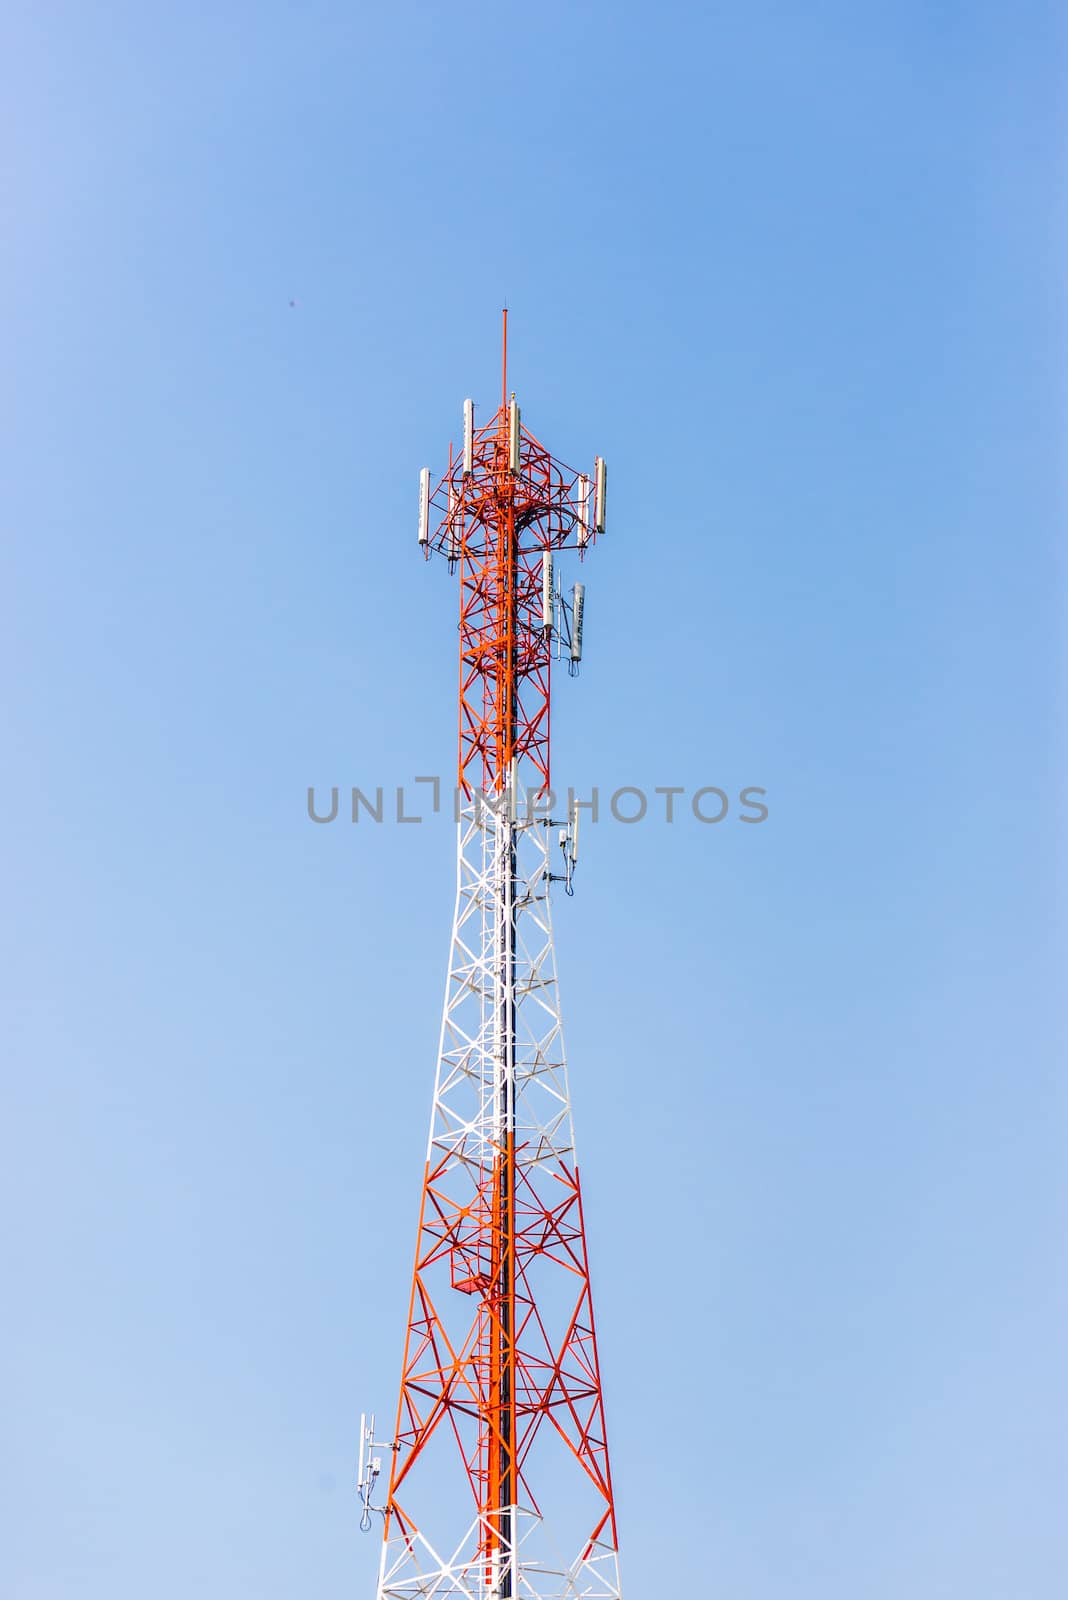 Cell phone signal station by wmitrmatr